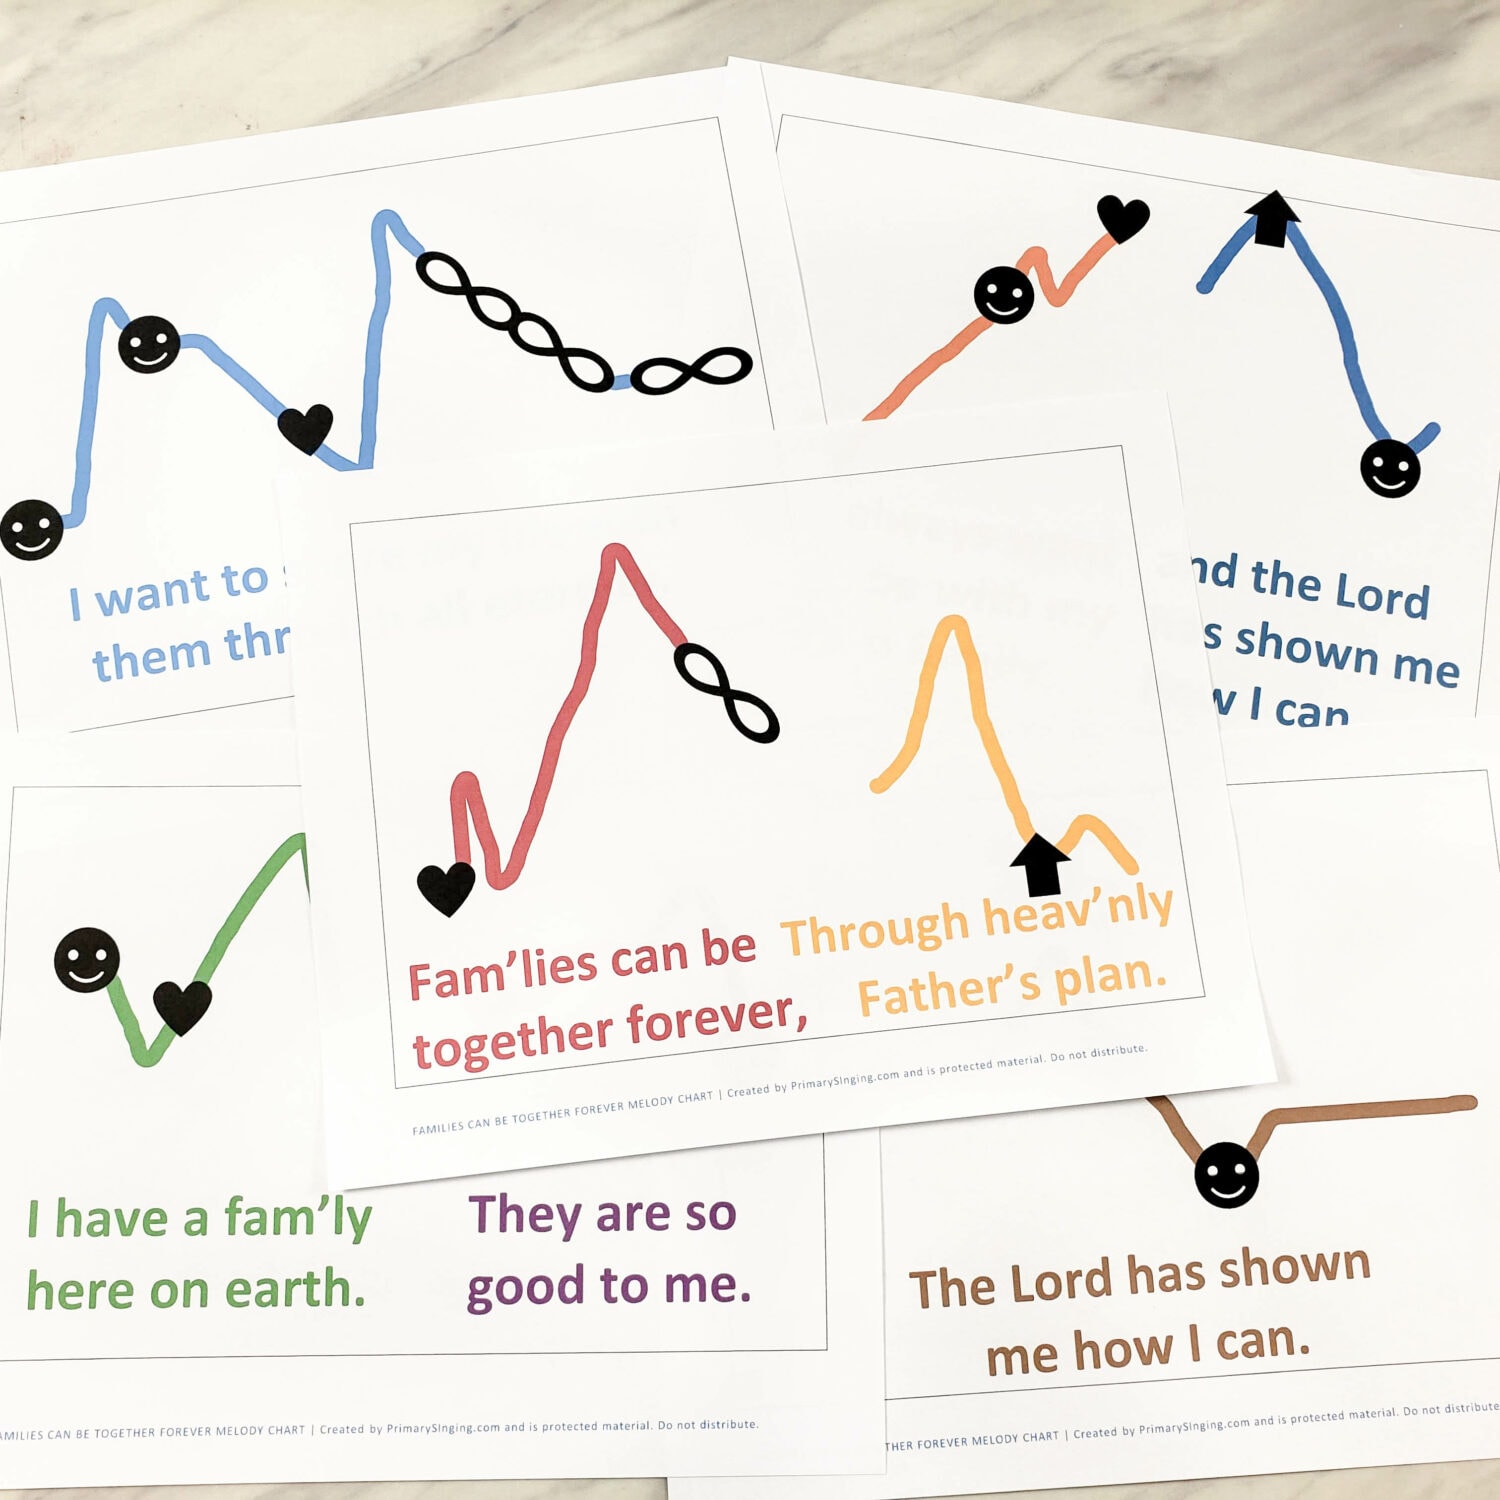 Families Can Be Together Forever melody chart printable singing time song helps for LDS Primary Music Leaders. Teach the melody with a flowing line chart and emojis that help kids learn the flow of the notes.